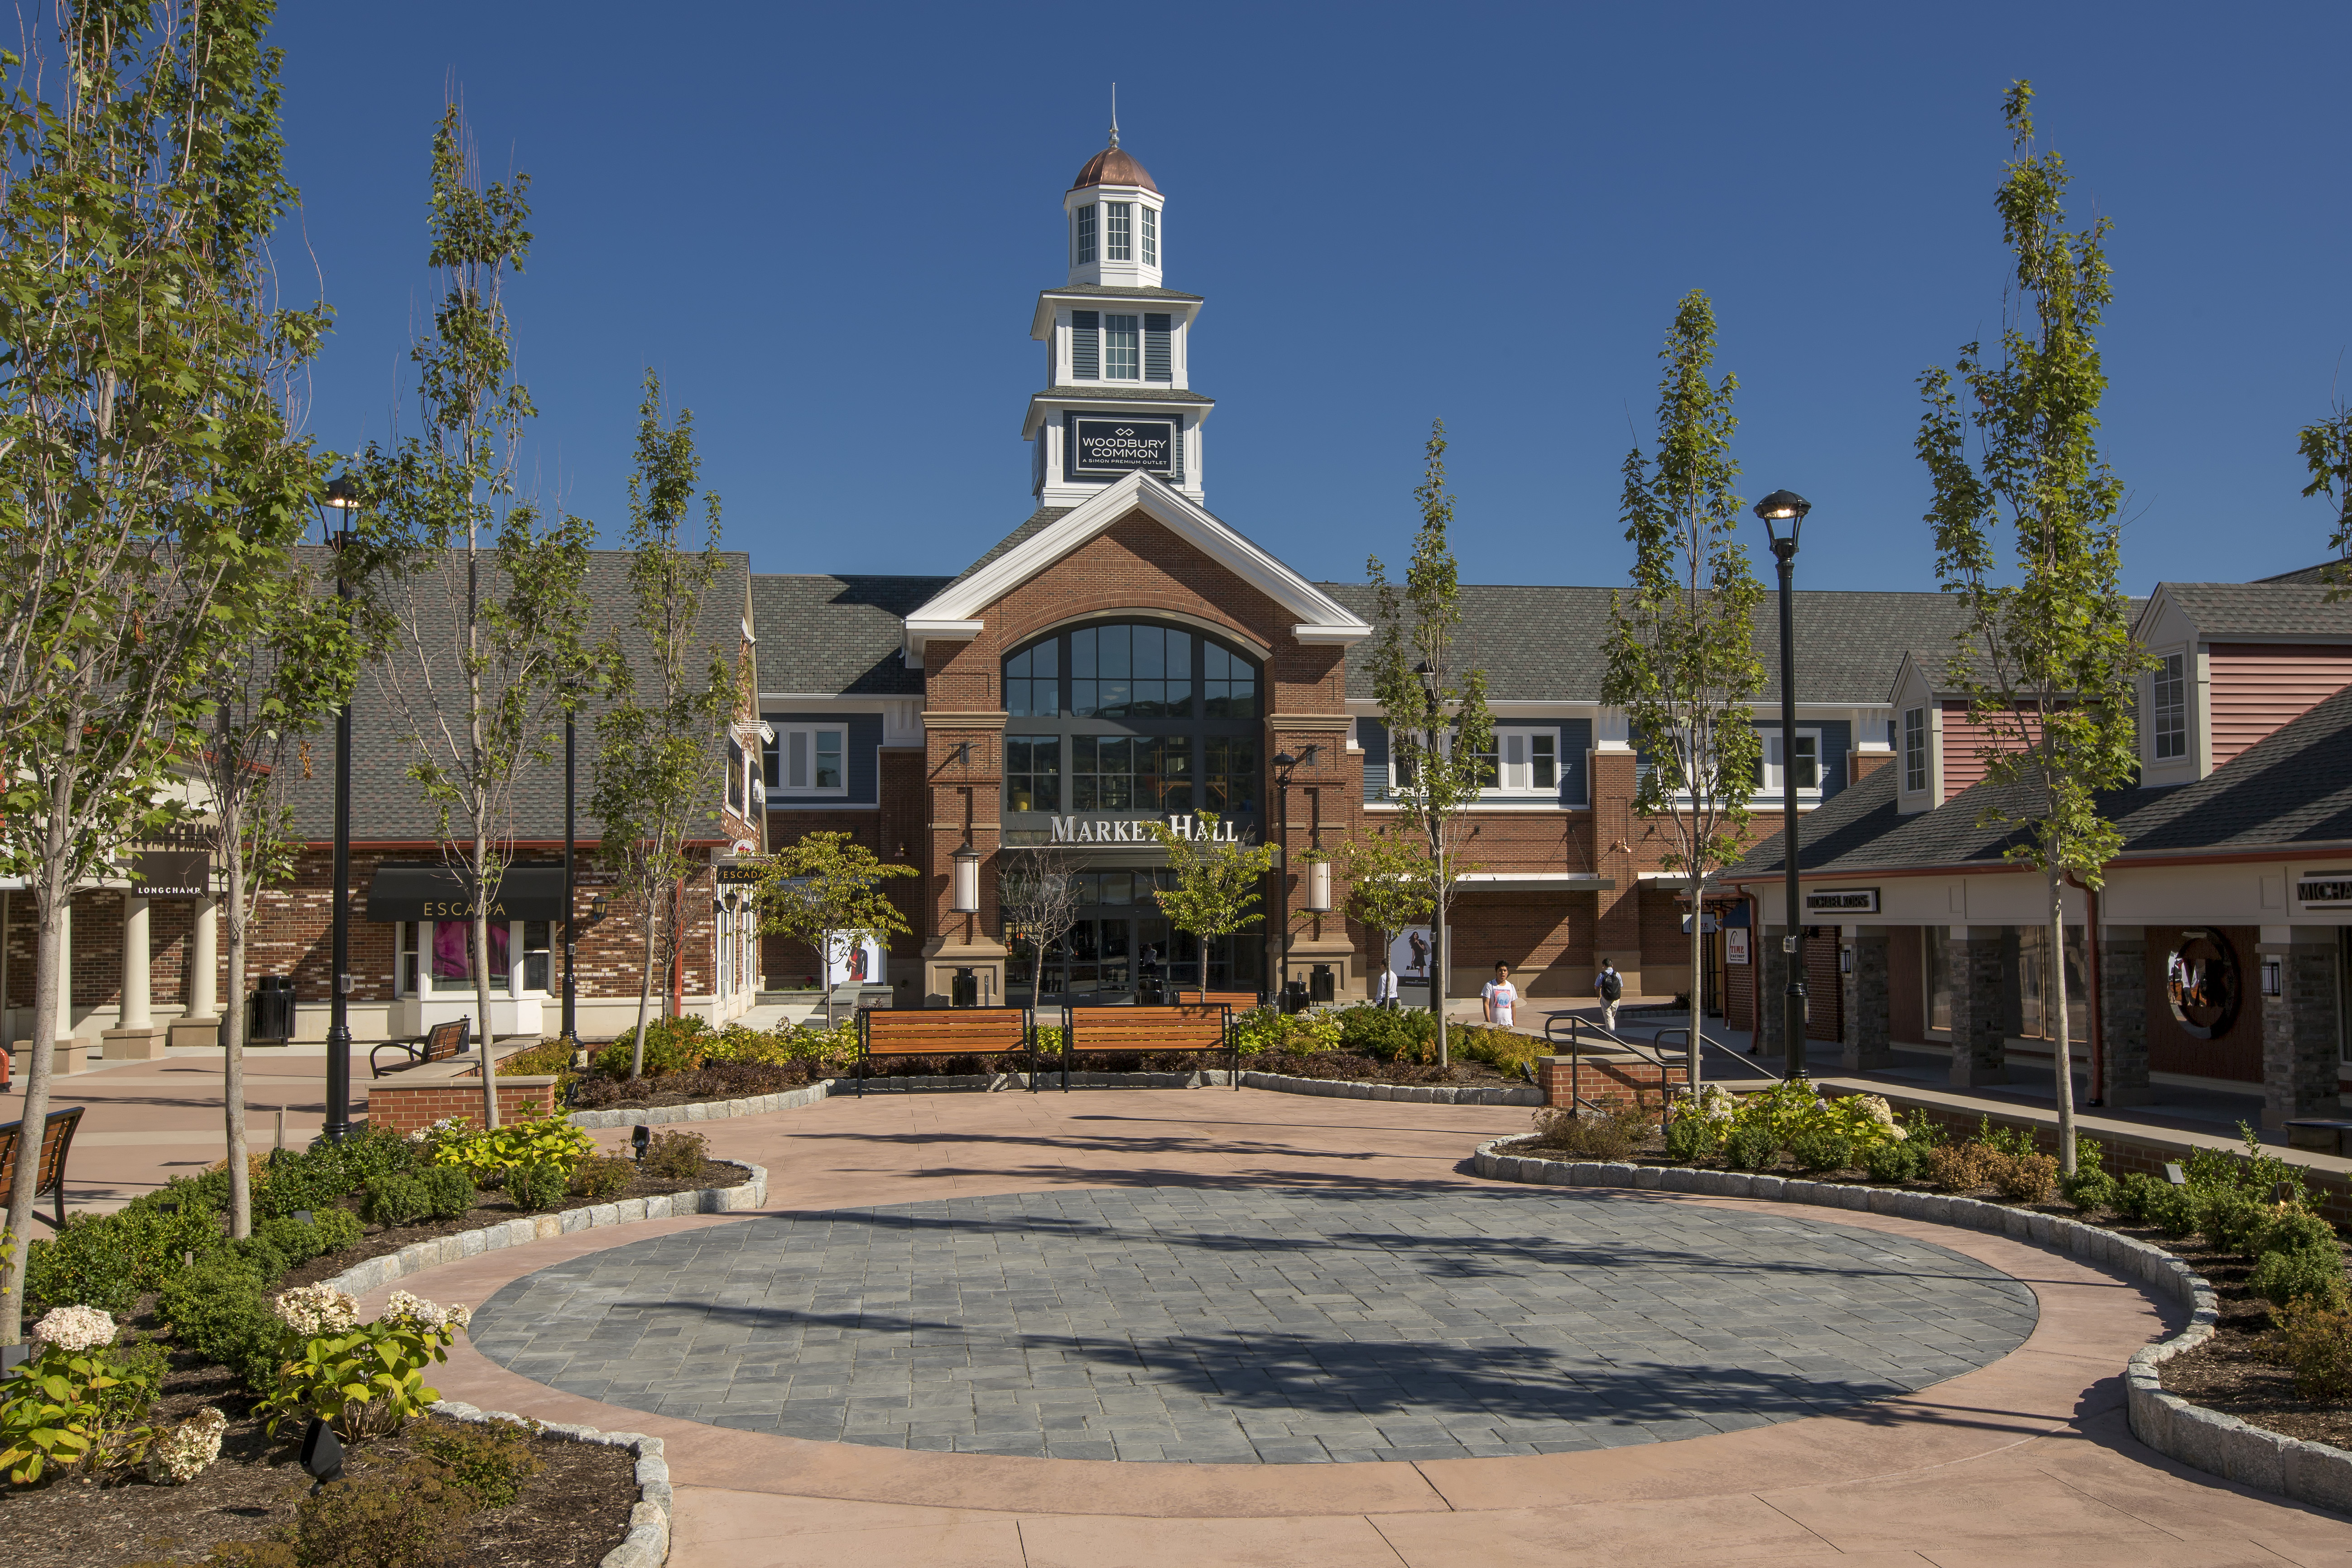 Woodbury Common Premium Outlets, Central Valley, Orange County